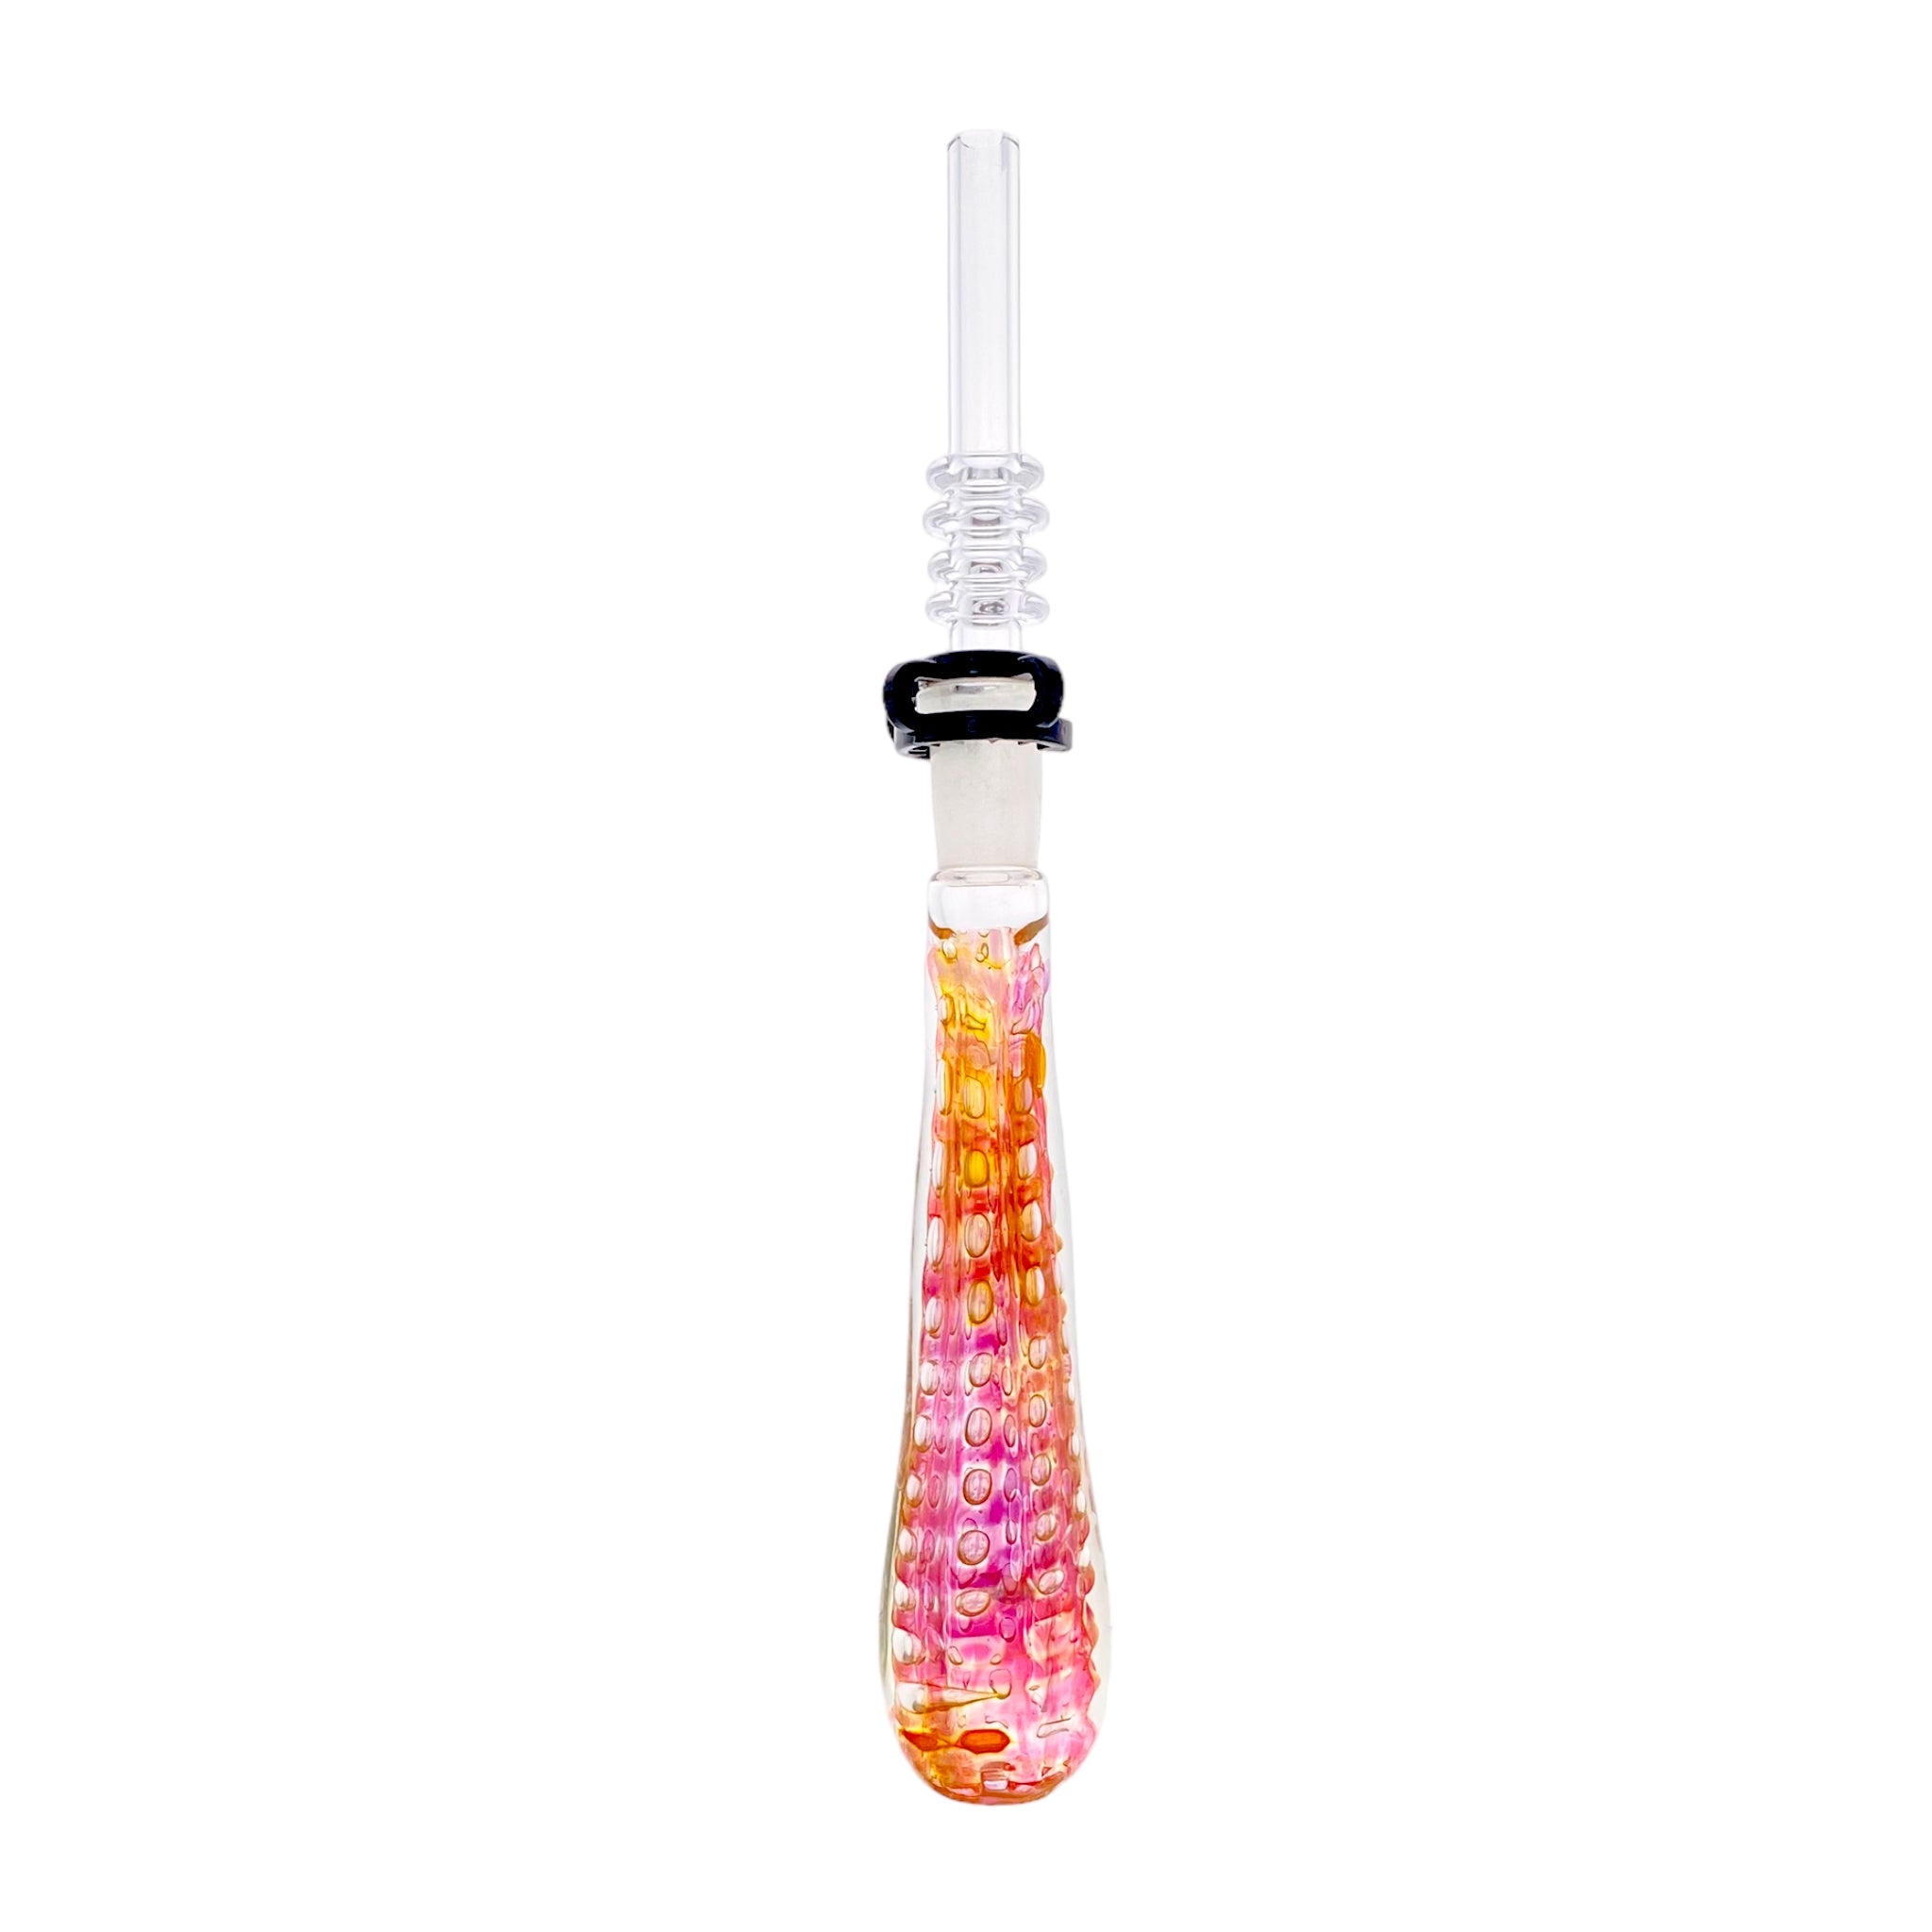 10mm Nectar Collector - Gold Fume With Air Trap Bubbles With 10mm Quartz Tip